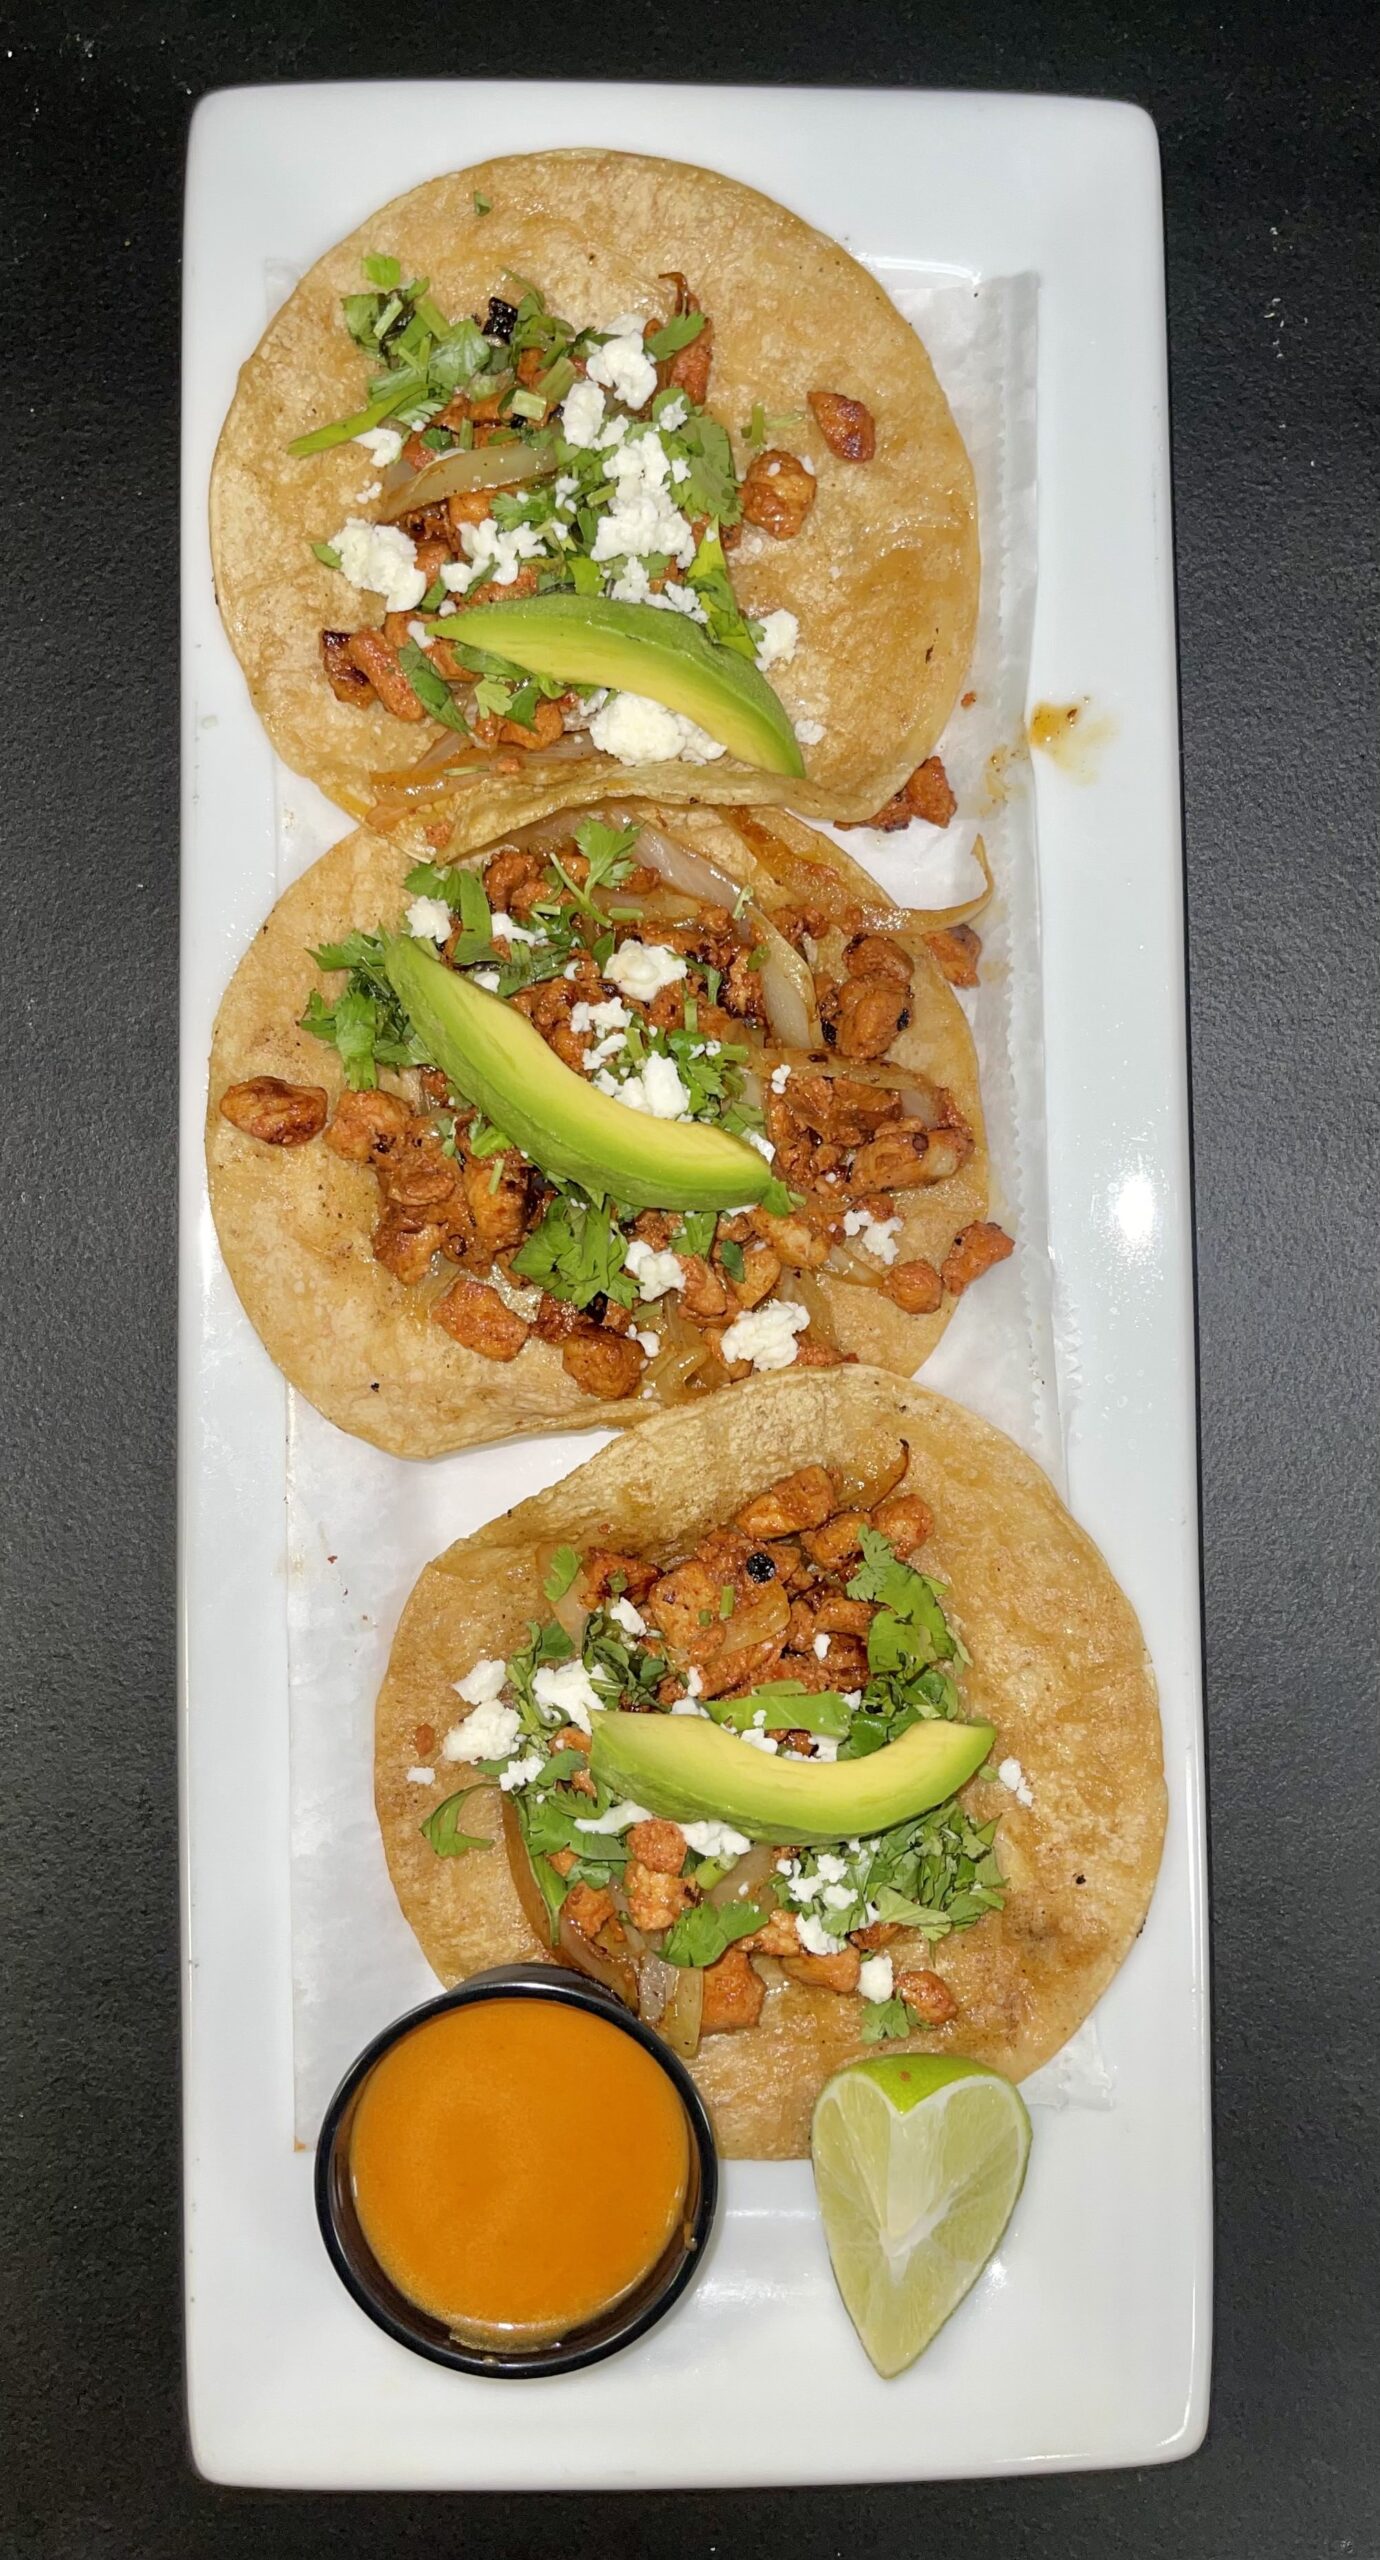 Casa Tequila Cantina & Grill | One-of-a-Kind Mexican Food in Warrenton, MO